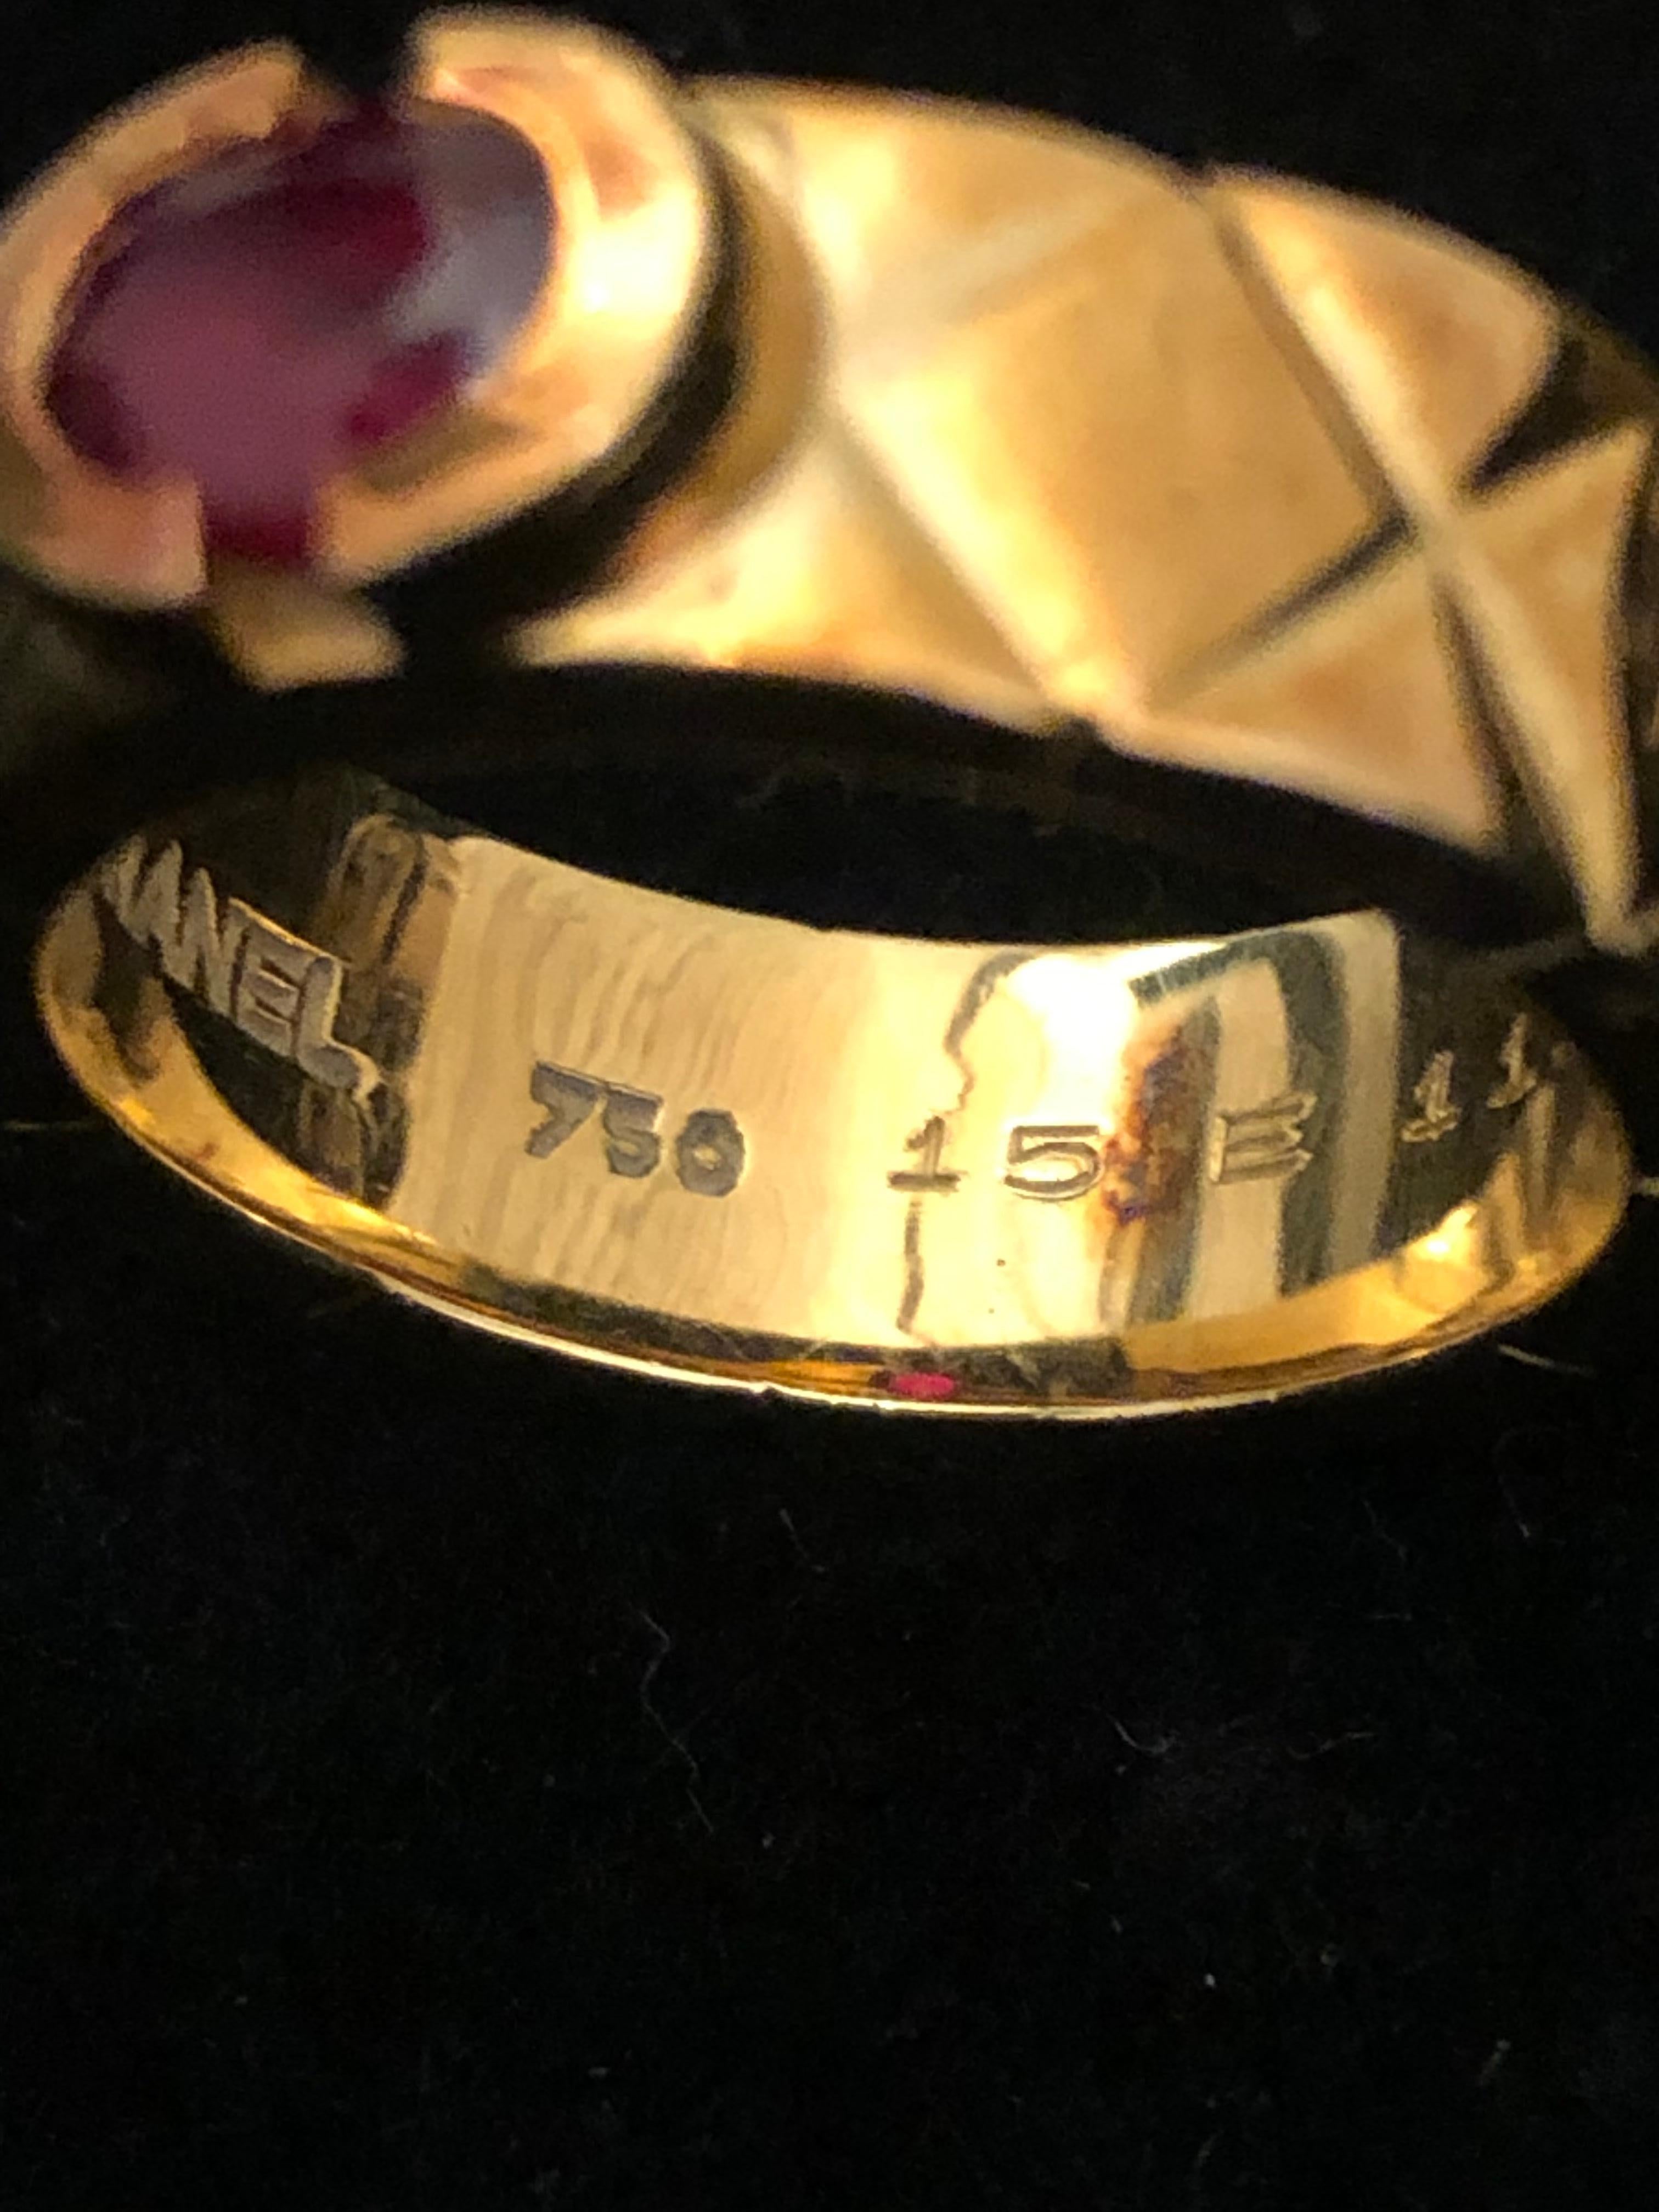 Chanel ruby bang ring set in 18K yellow gold with Matelasse pattern. Weighs approximately 11.38 grams. Come with box.

Stamped CHANEL 750 15 E 1192

Size 6 (US) 51.5 (EU)

Condition: Light surface scratches, not noticeable when worn. Generally in